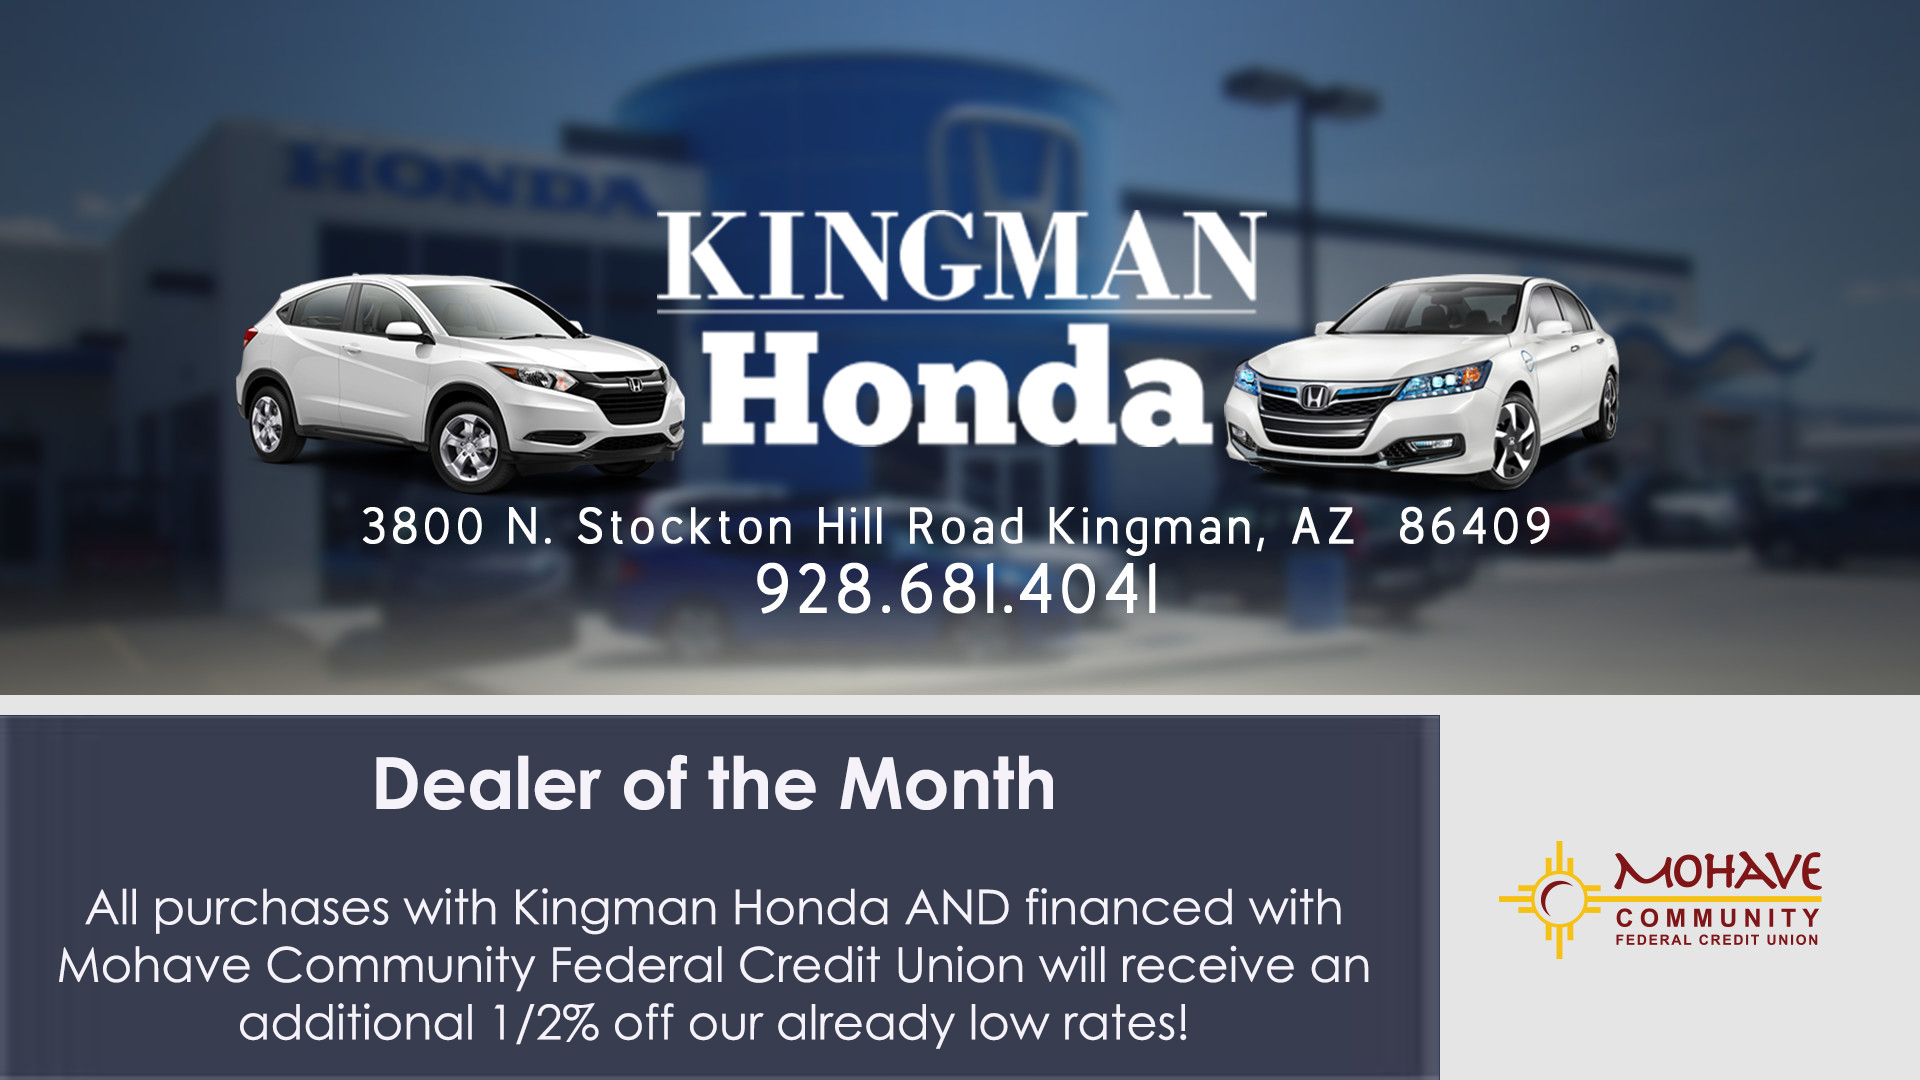 Kingman Honda is our dealer of the month. All purchases from Kingman Honda and financed with MCFCU will receicve an additional 1/2% off our already low rates. Member NCUA. Some restrictions may apply. Call us at 928-753-8000 for more details. July 1st - July 31st 2019.